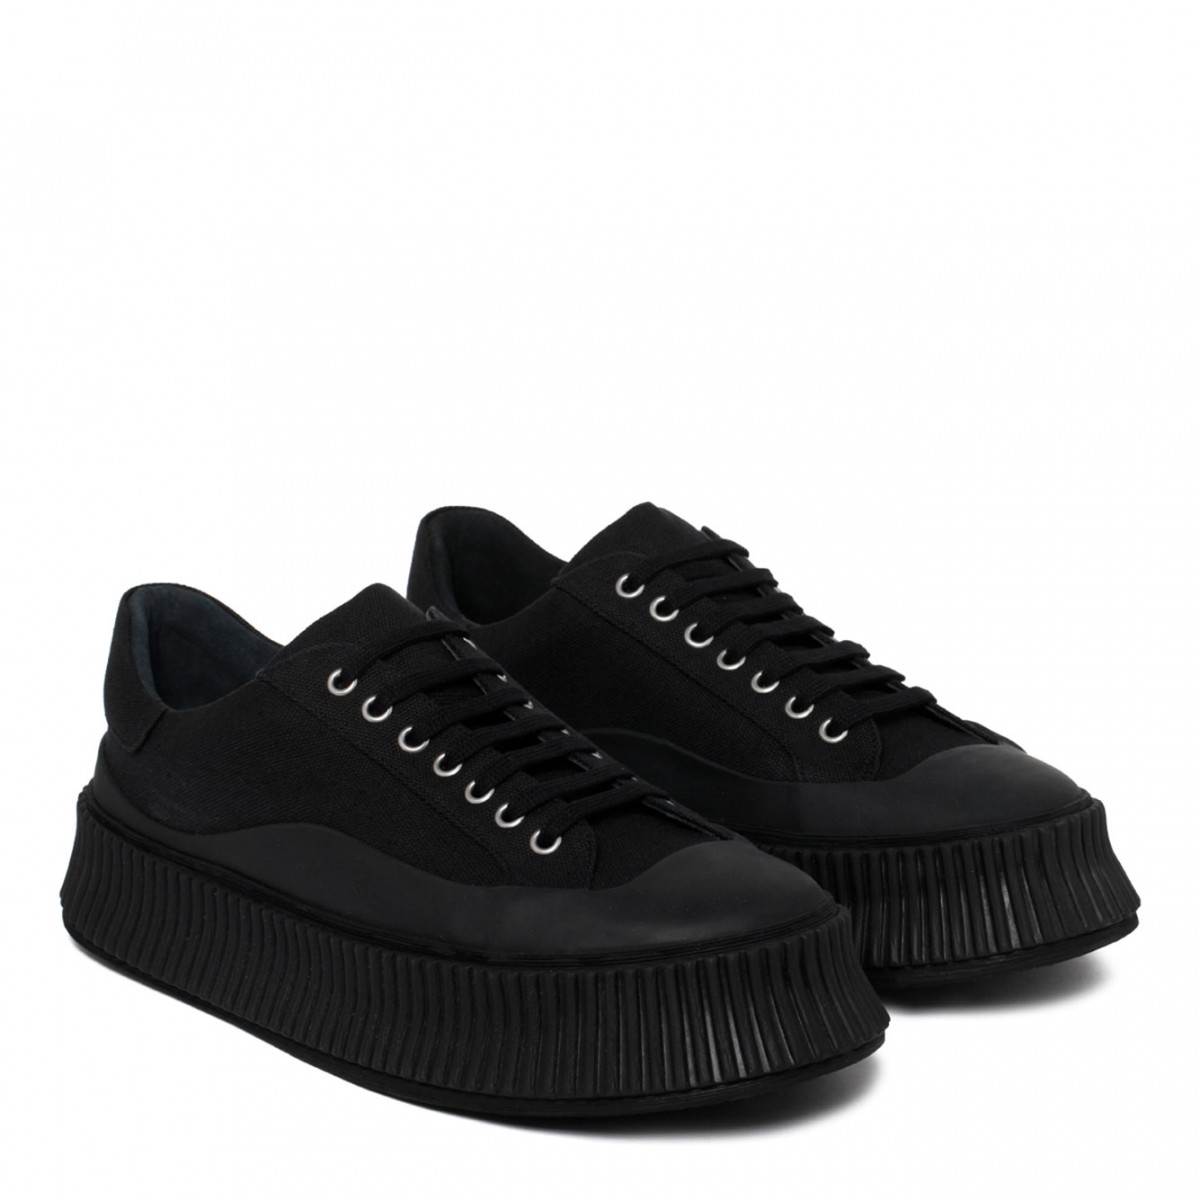 Black Calf Leather Big Sole Chunky Sneakers| COLOGNESE 1882